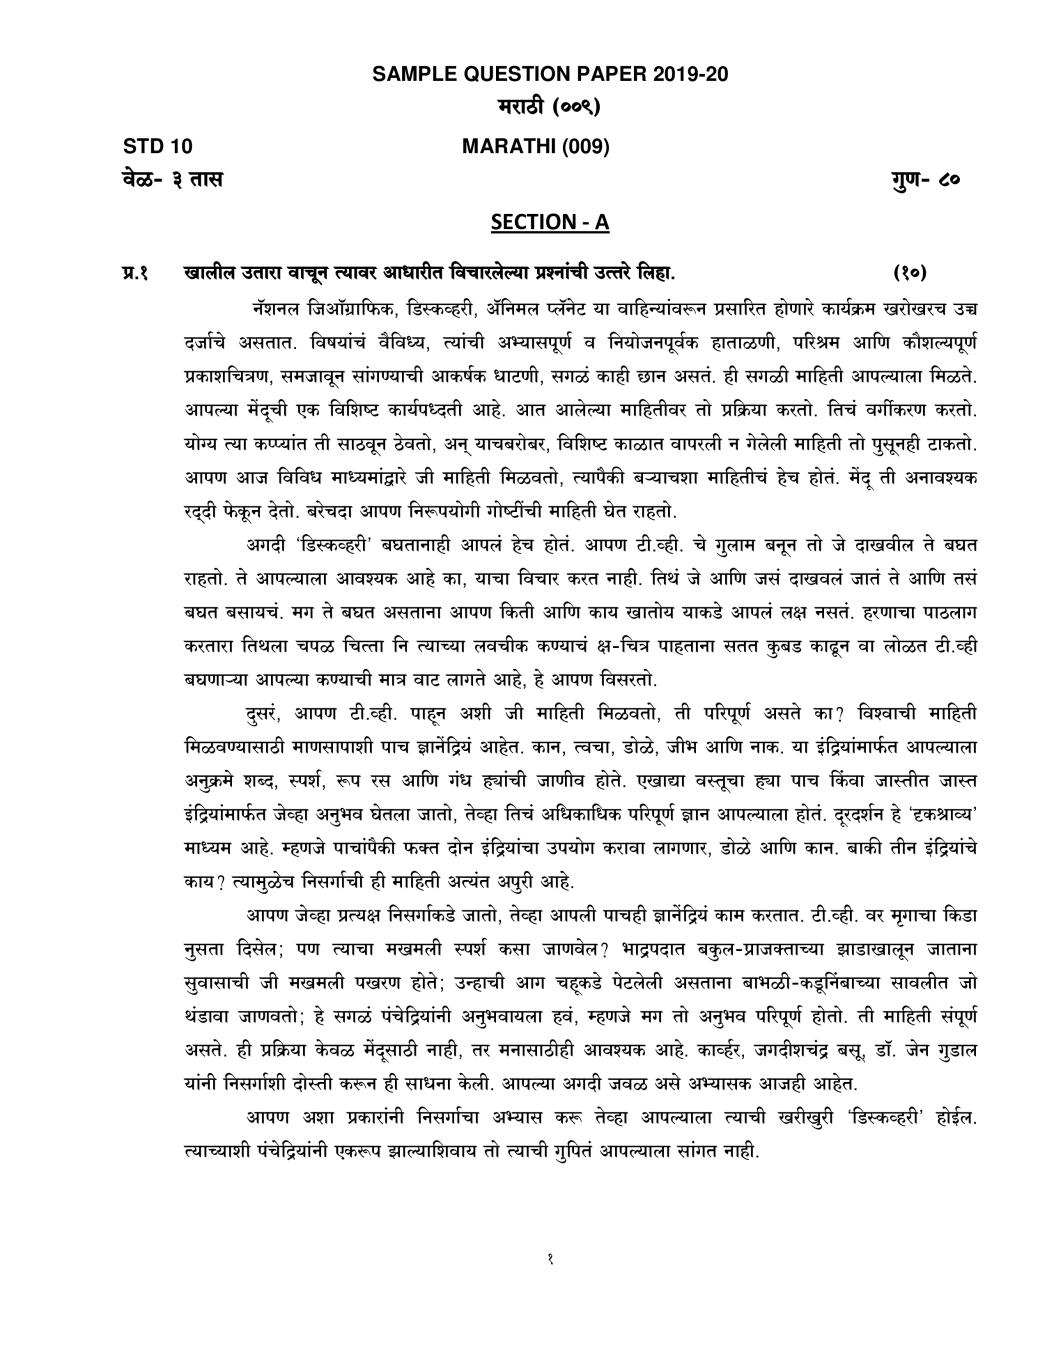 CBSE Class 10 Sample Paper 2020 for Marathi - Page 1